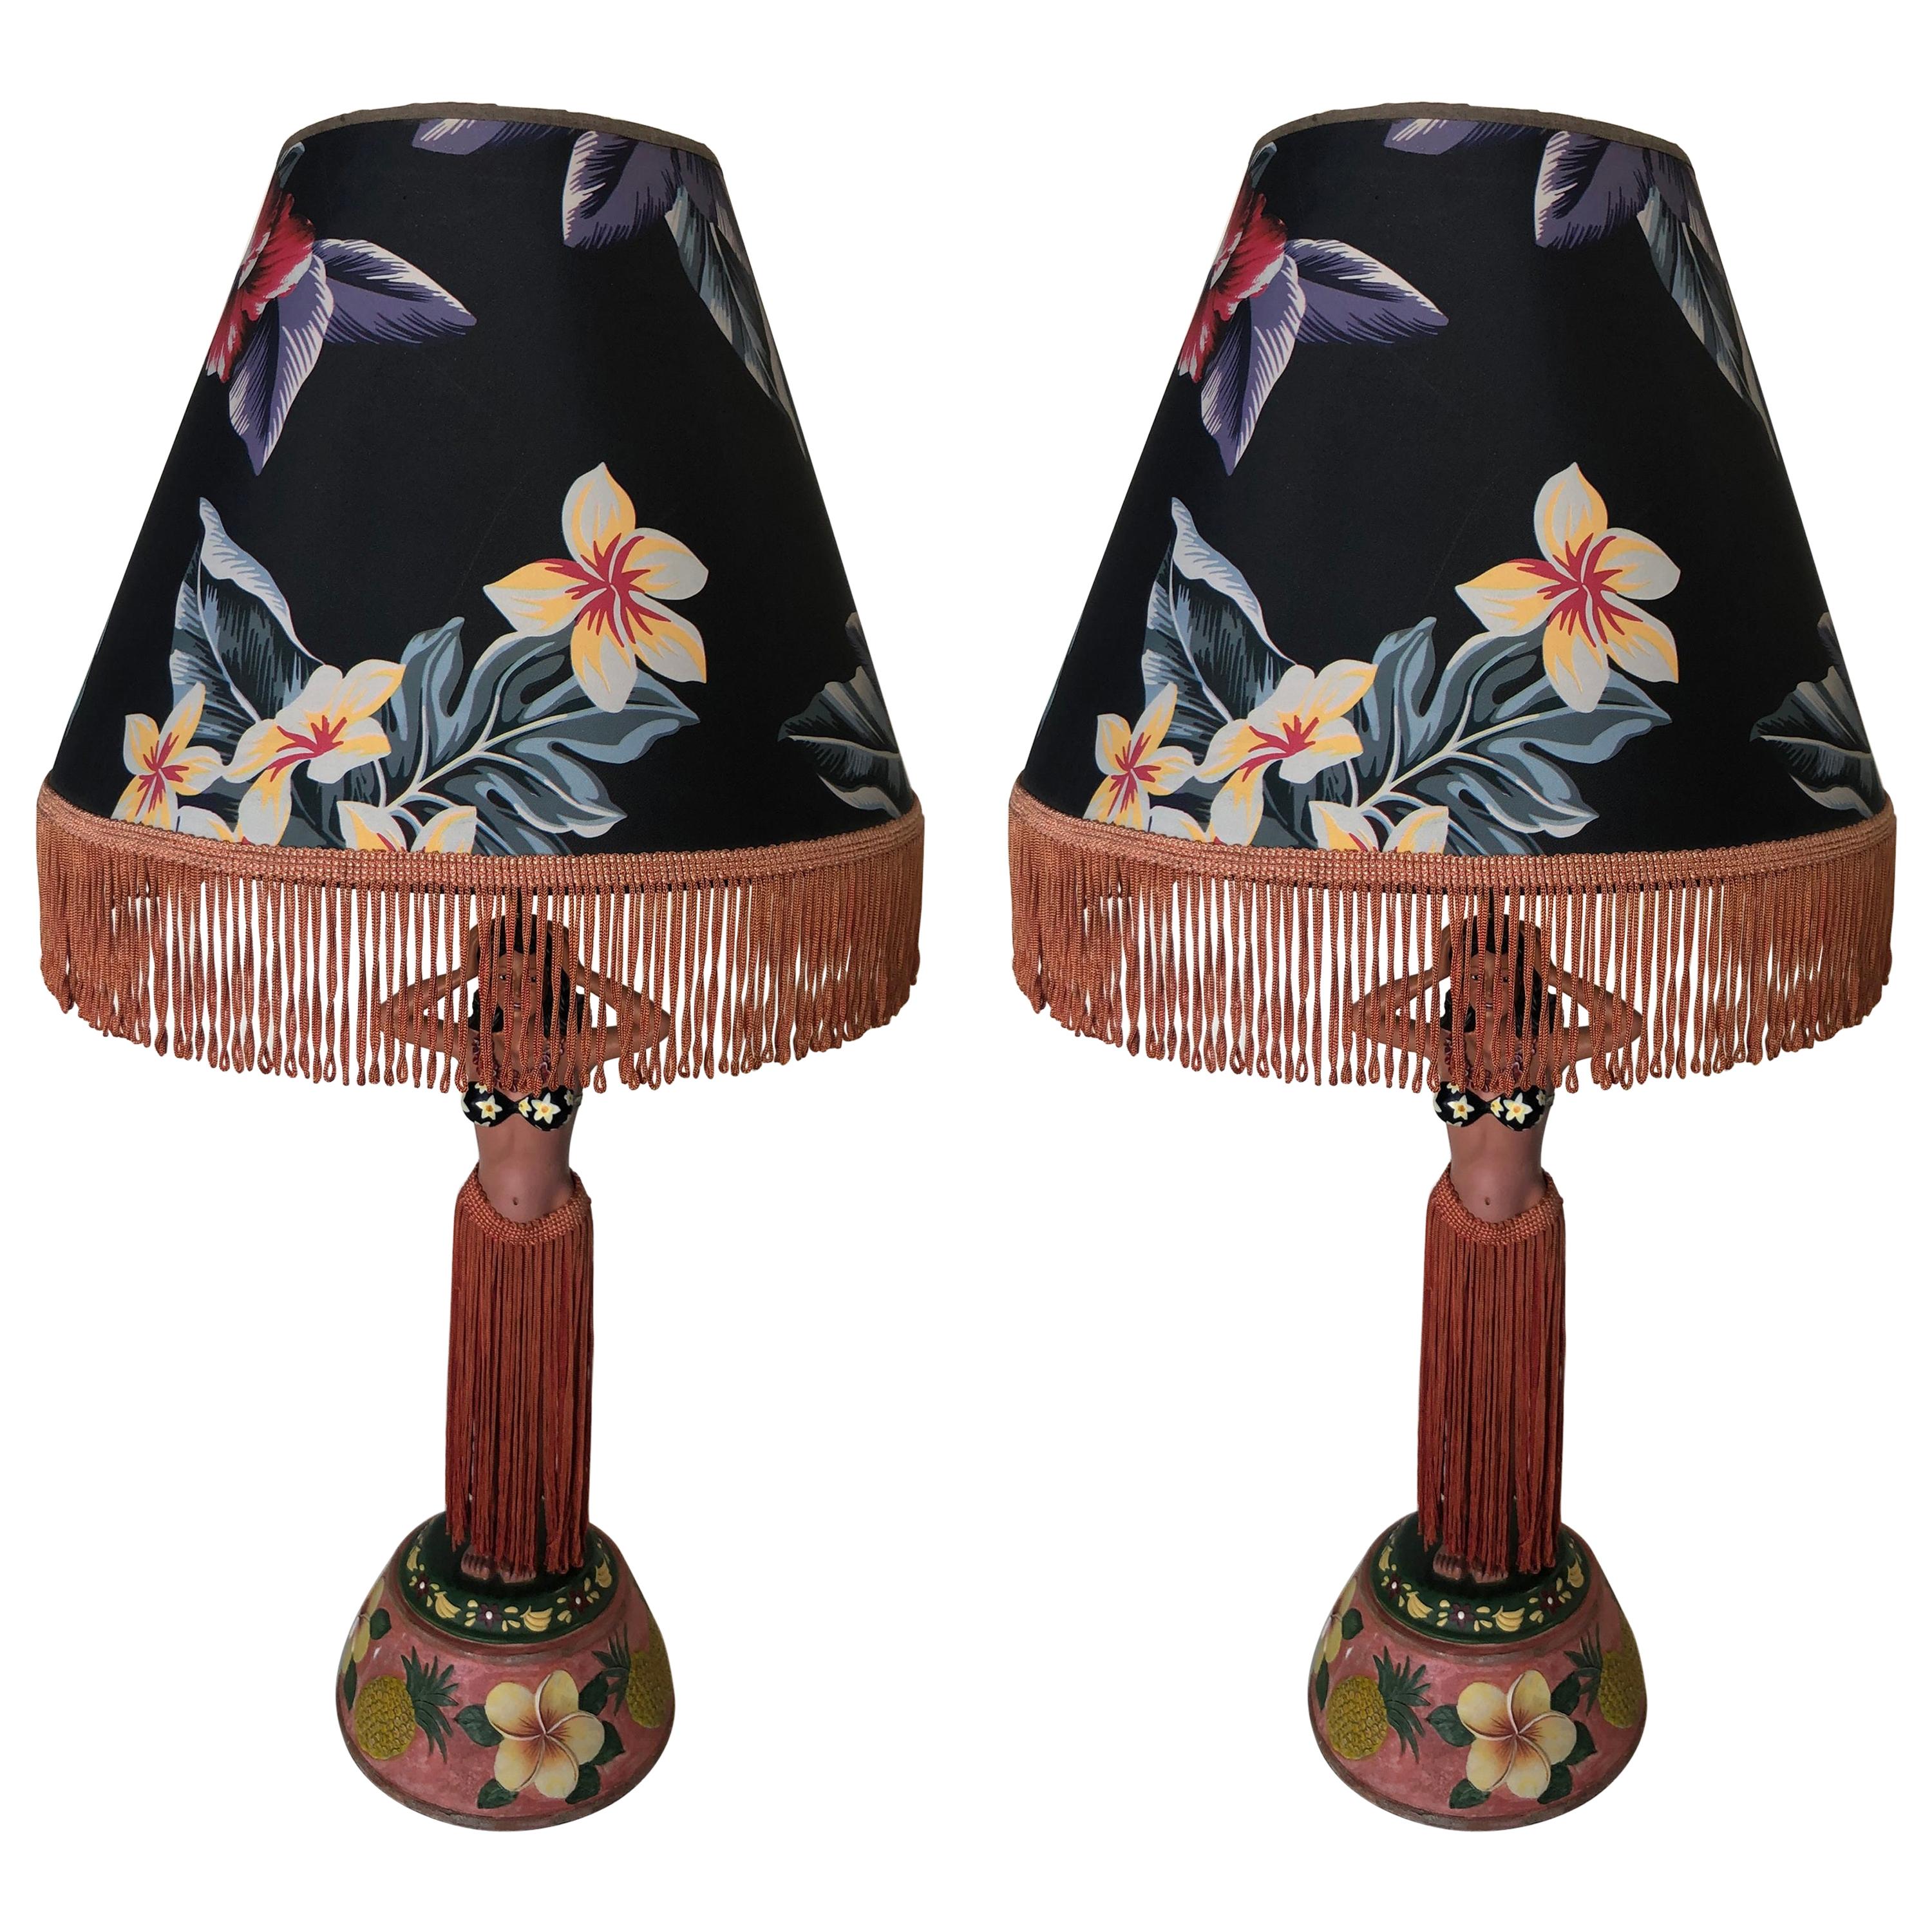 Pair of Hula Girl Resin Table Lamp with Floral Fringe Lamp Shades